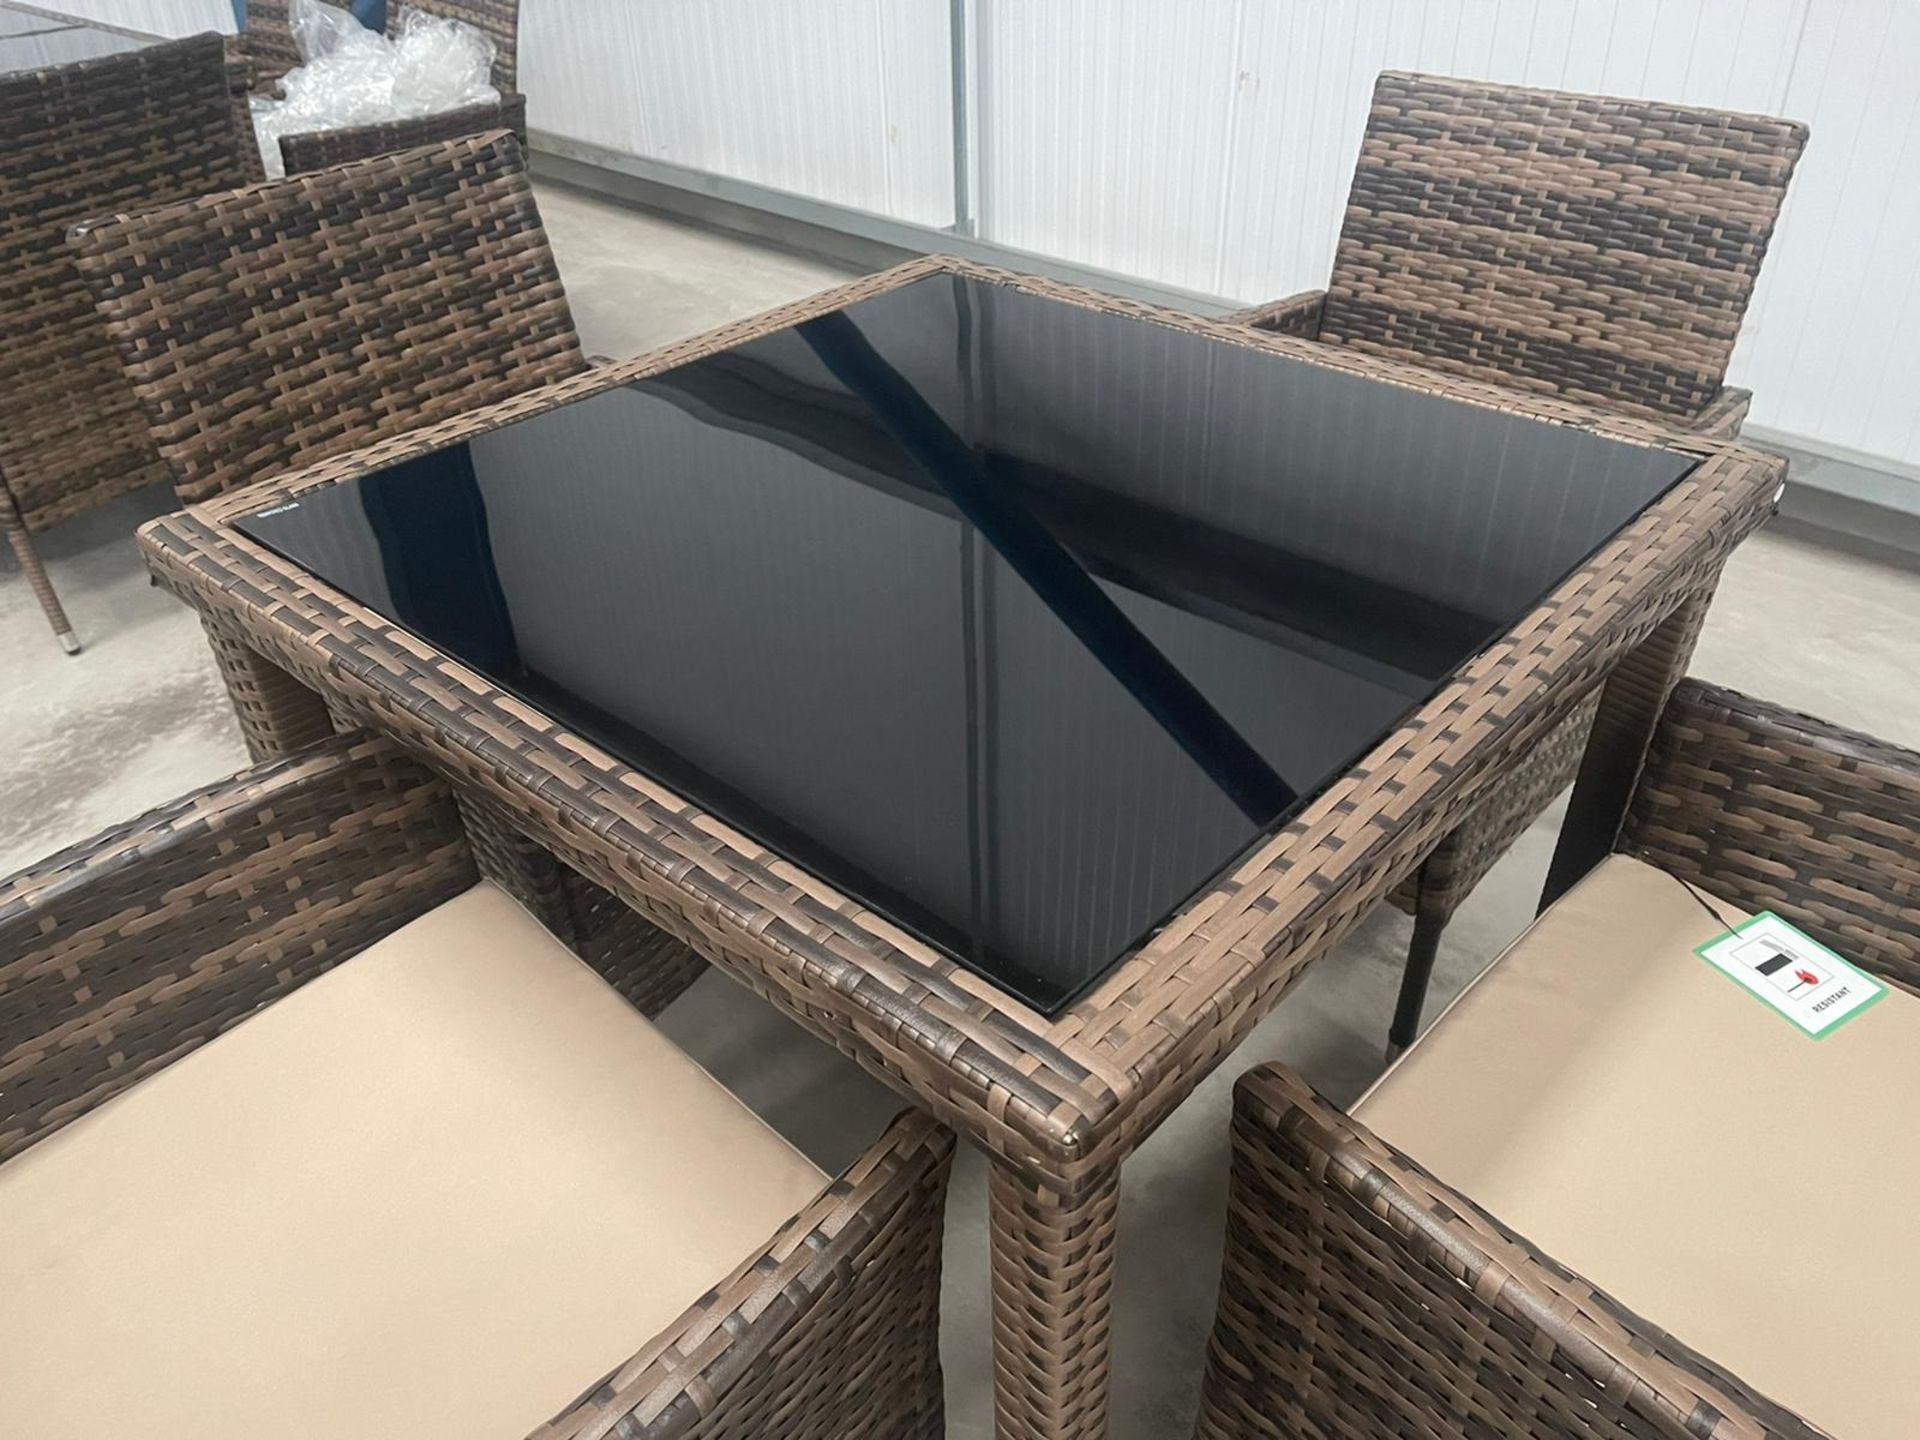 RRP £749 - NEW BROWN DINING SET WITH FOUR CHAIRS - LUXURY BLACK GLASS TOPPED DINING TABLE AND - Image 2 of 5